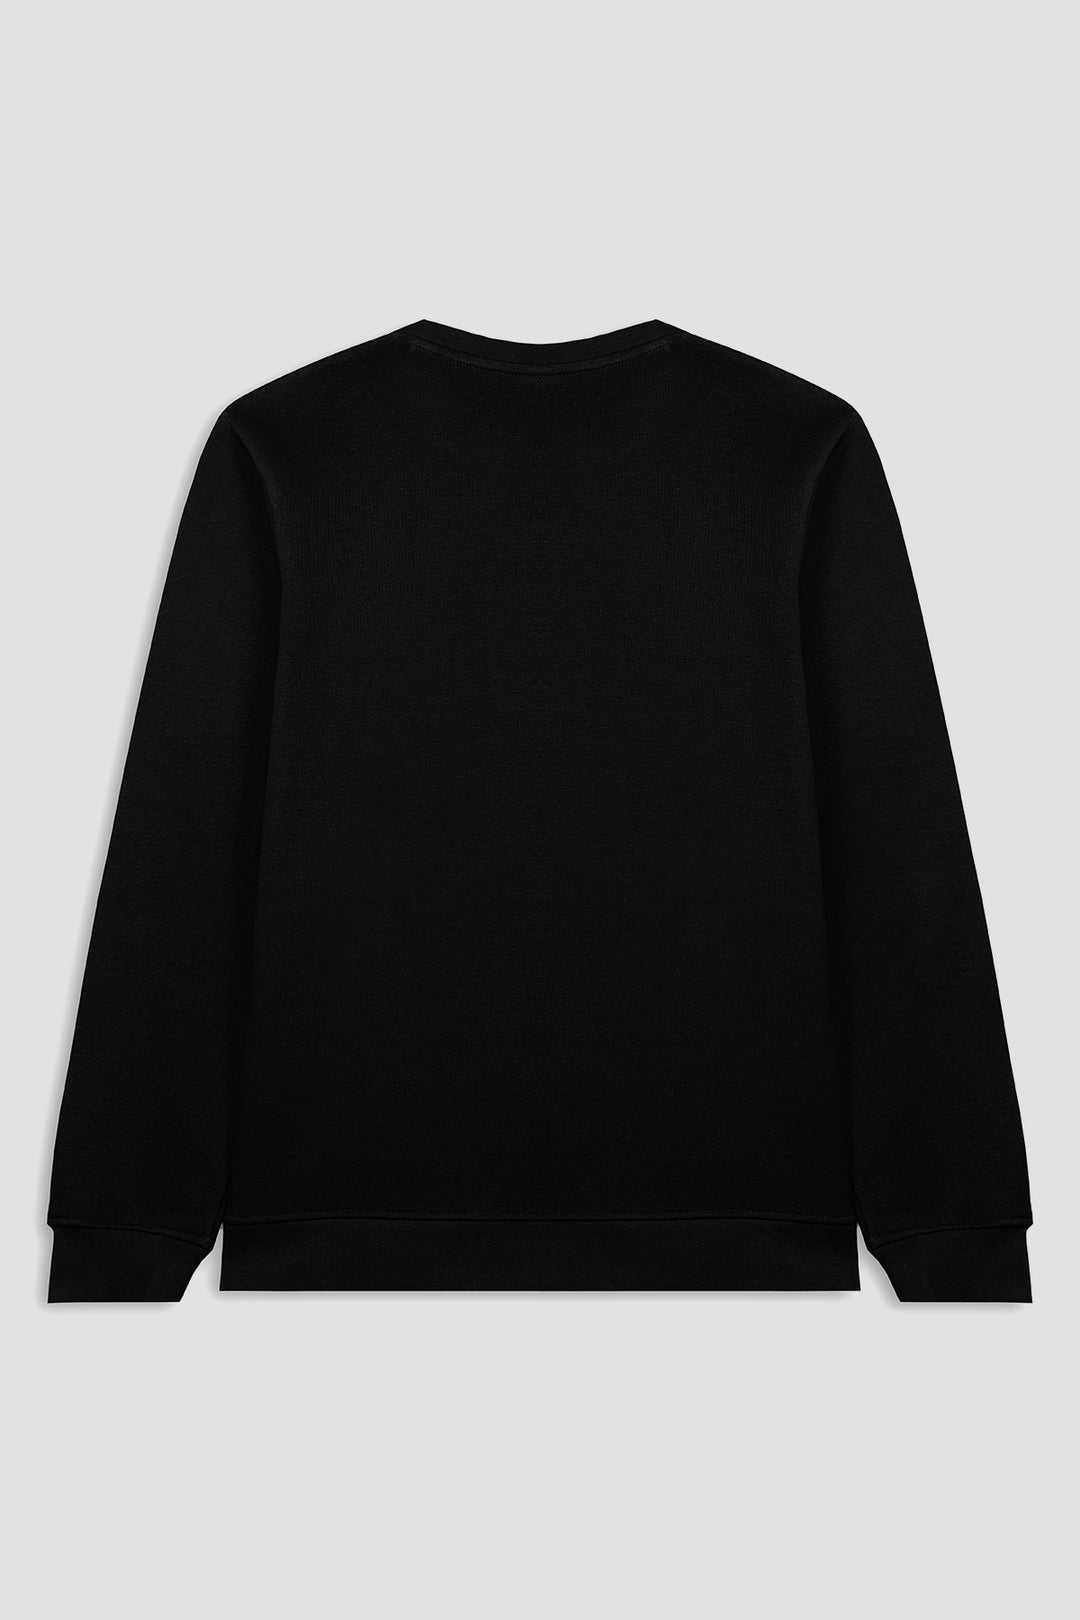 Unstoppable Embroidered Black Sweatshirt - W22 - USW009R